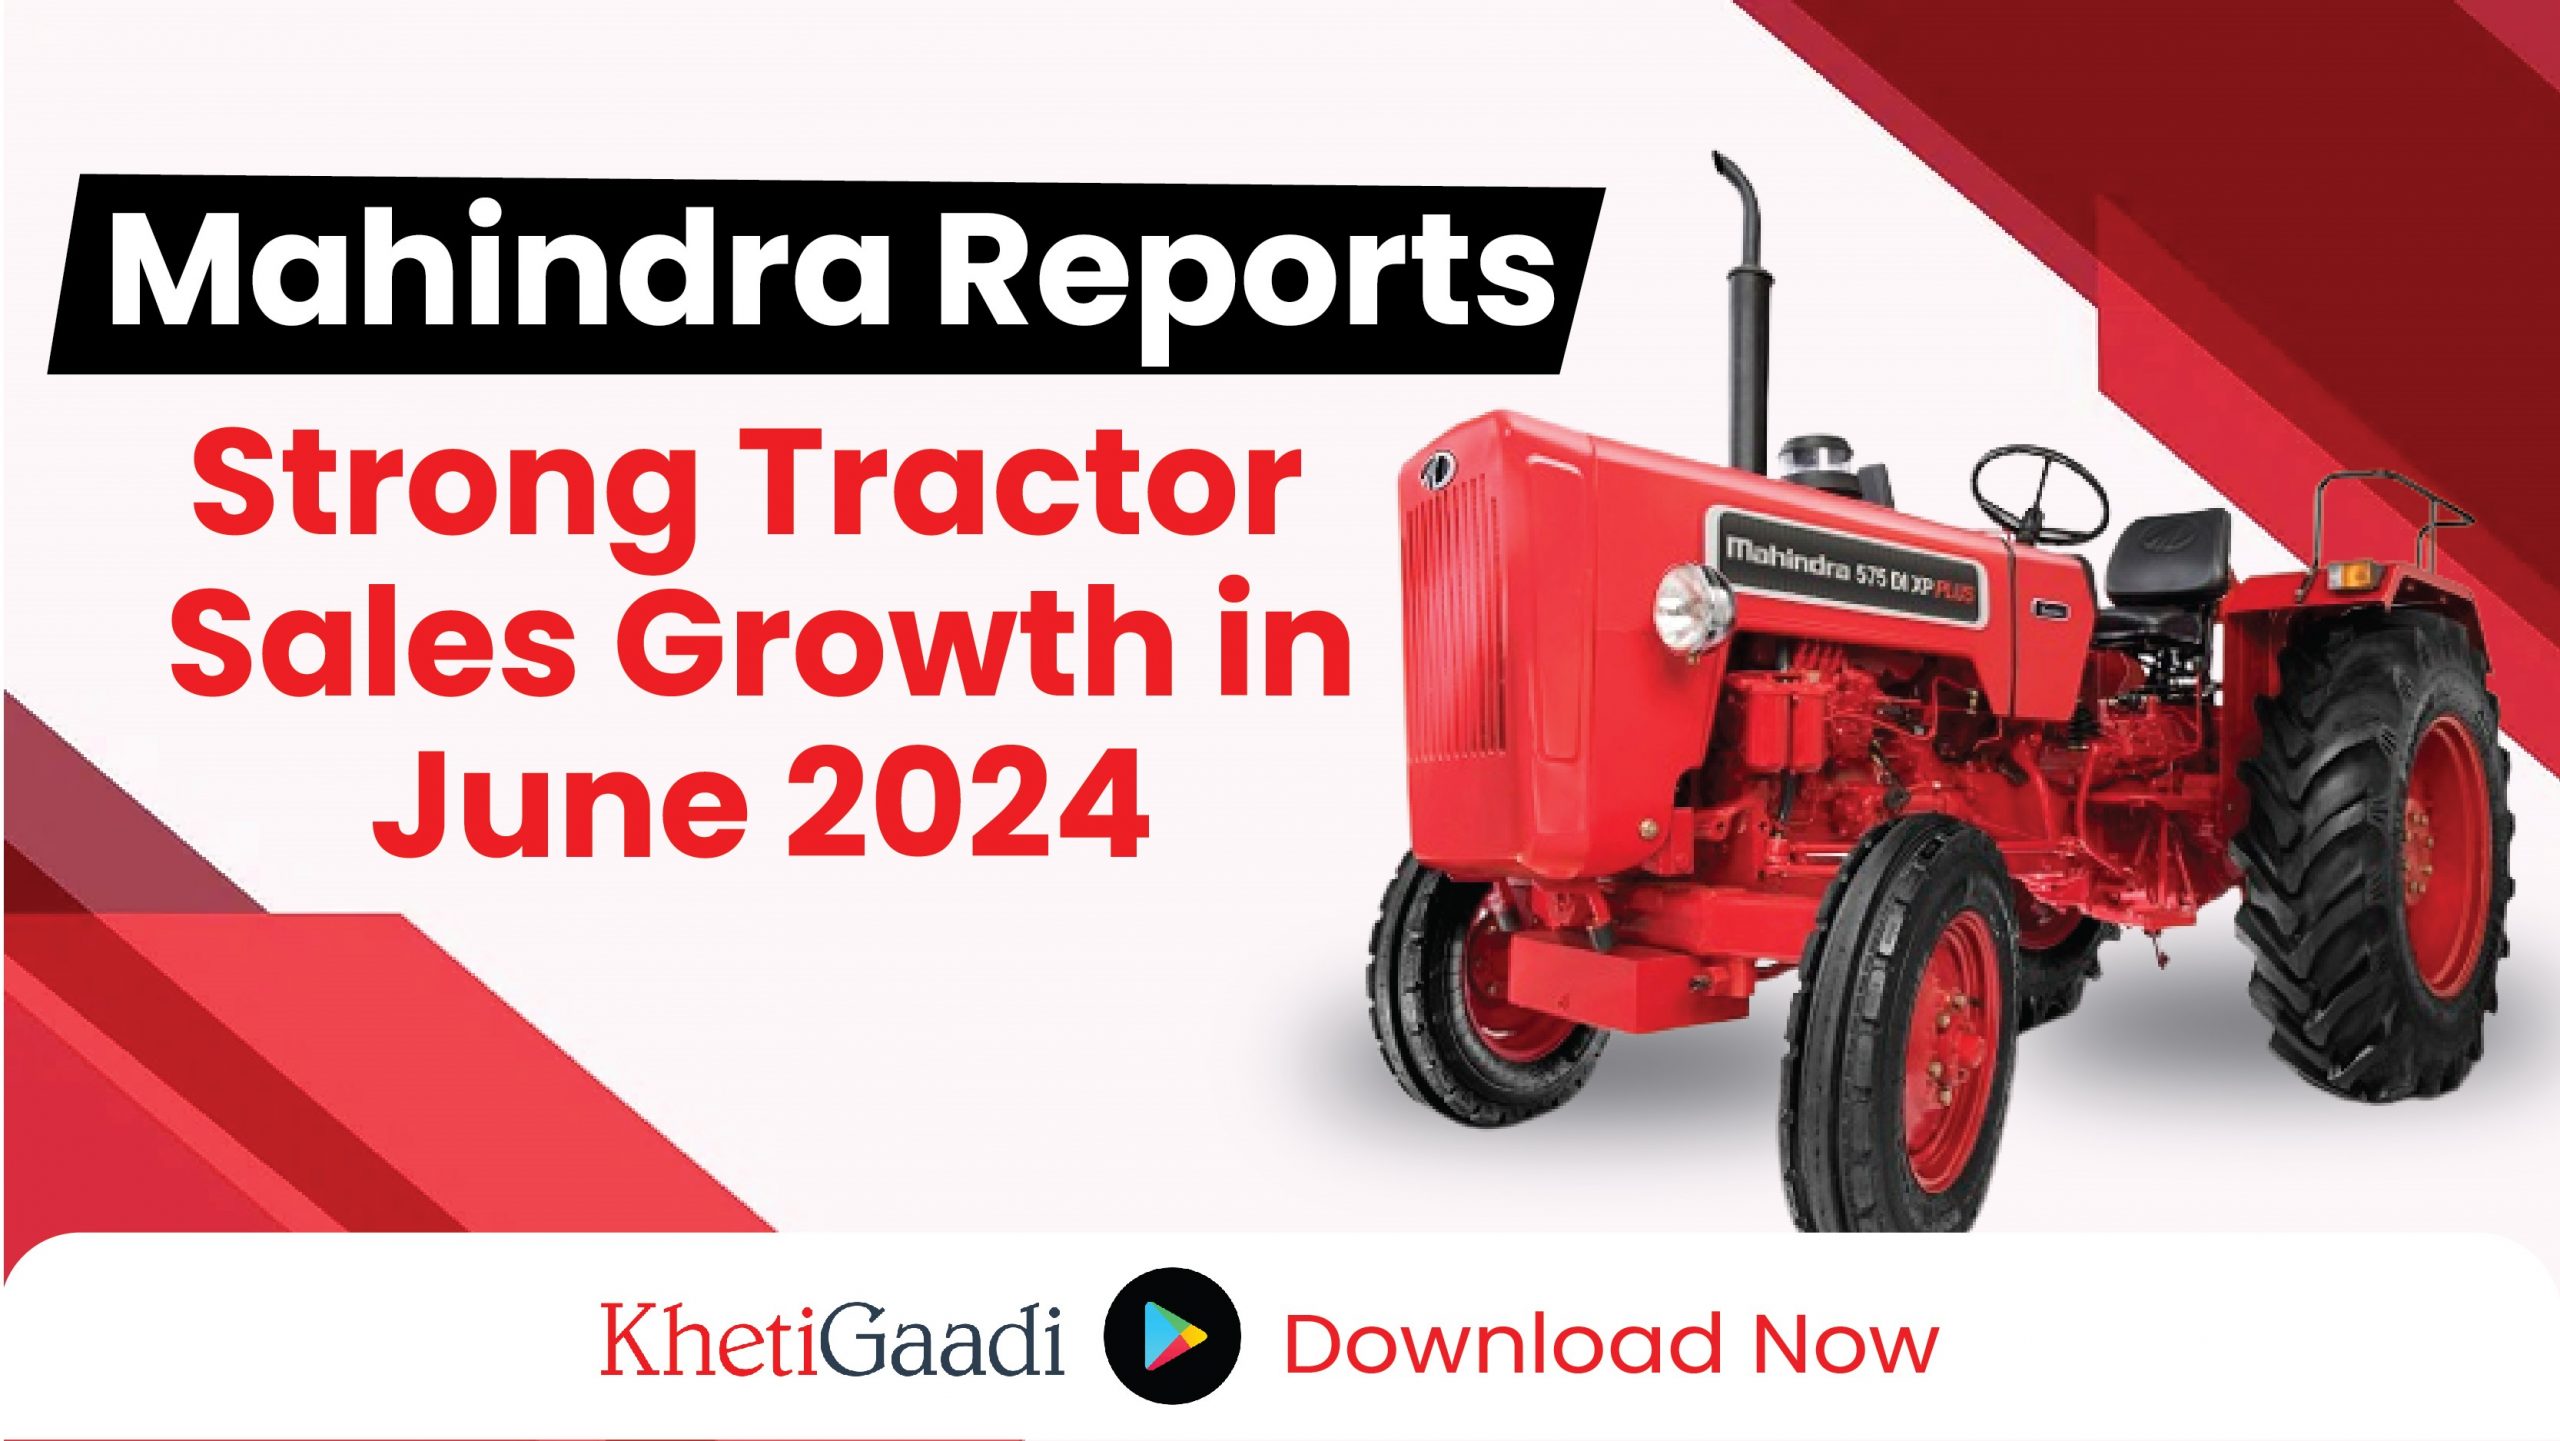 Mahindra Tractor Reports Strong Sales Growth in June 2024